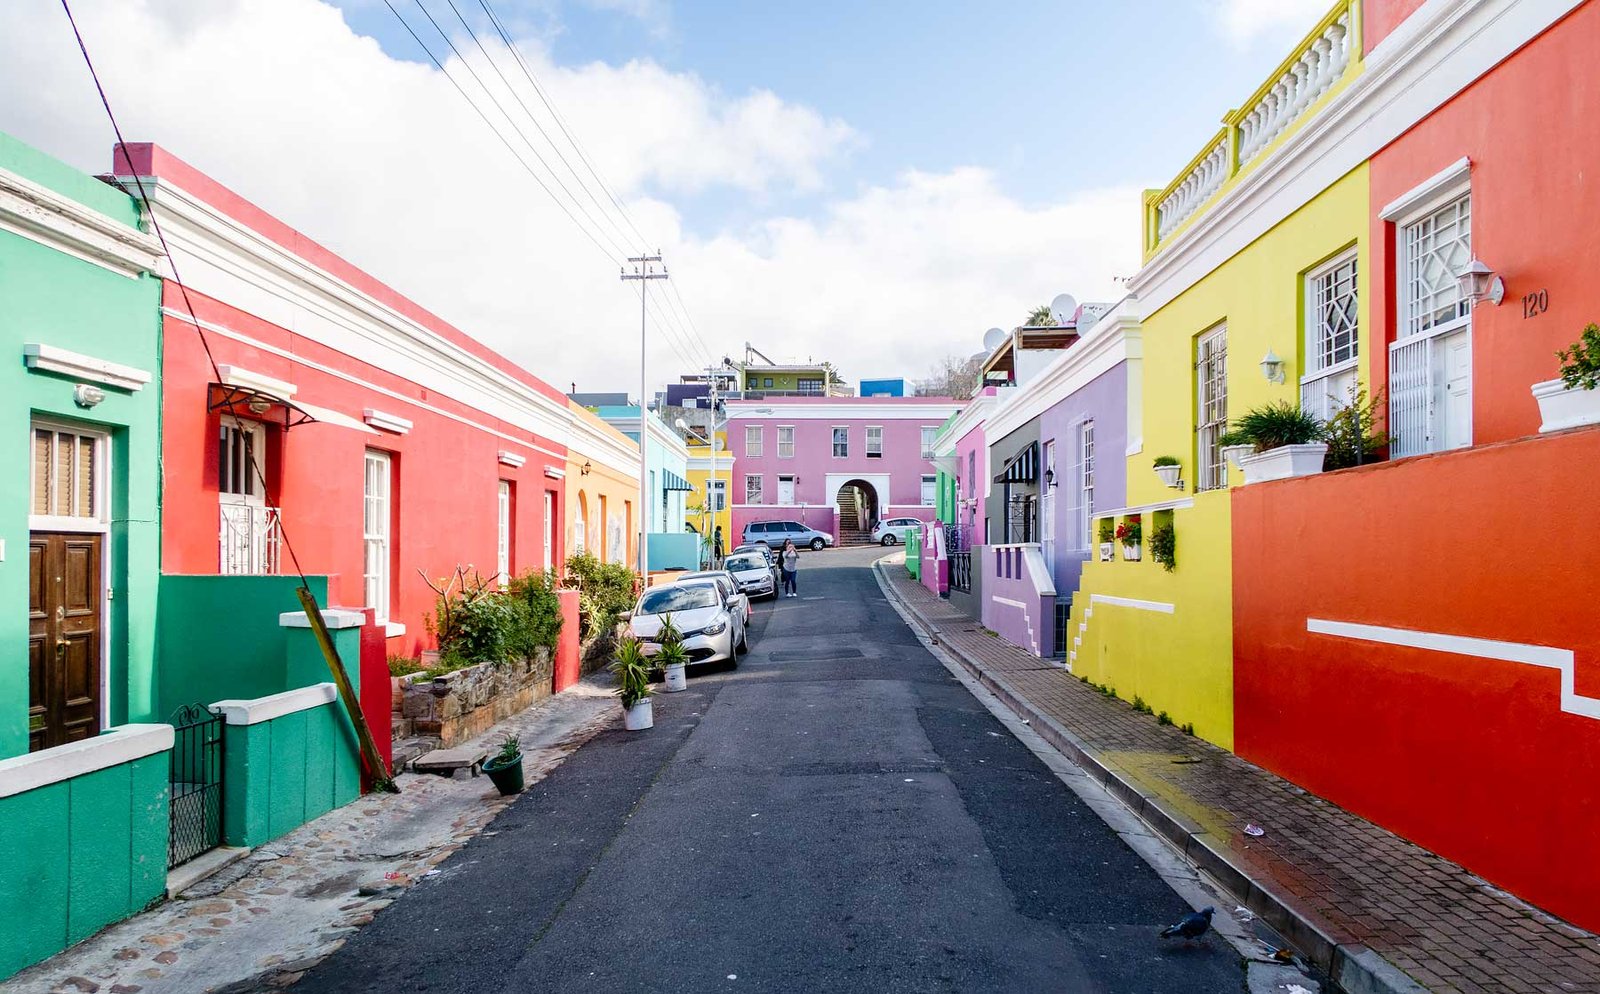 Bo-Kaap in Cape Town with many colorful houses. South Africa in 3 Weeks | The Perfect South Africa itinerary for your first trip.